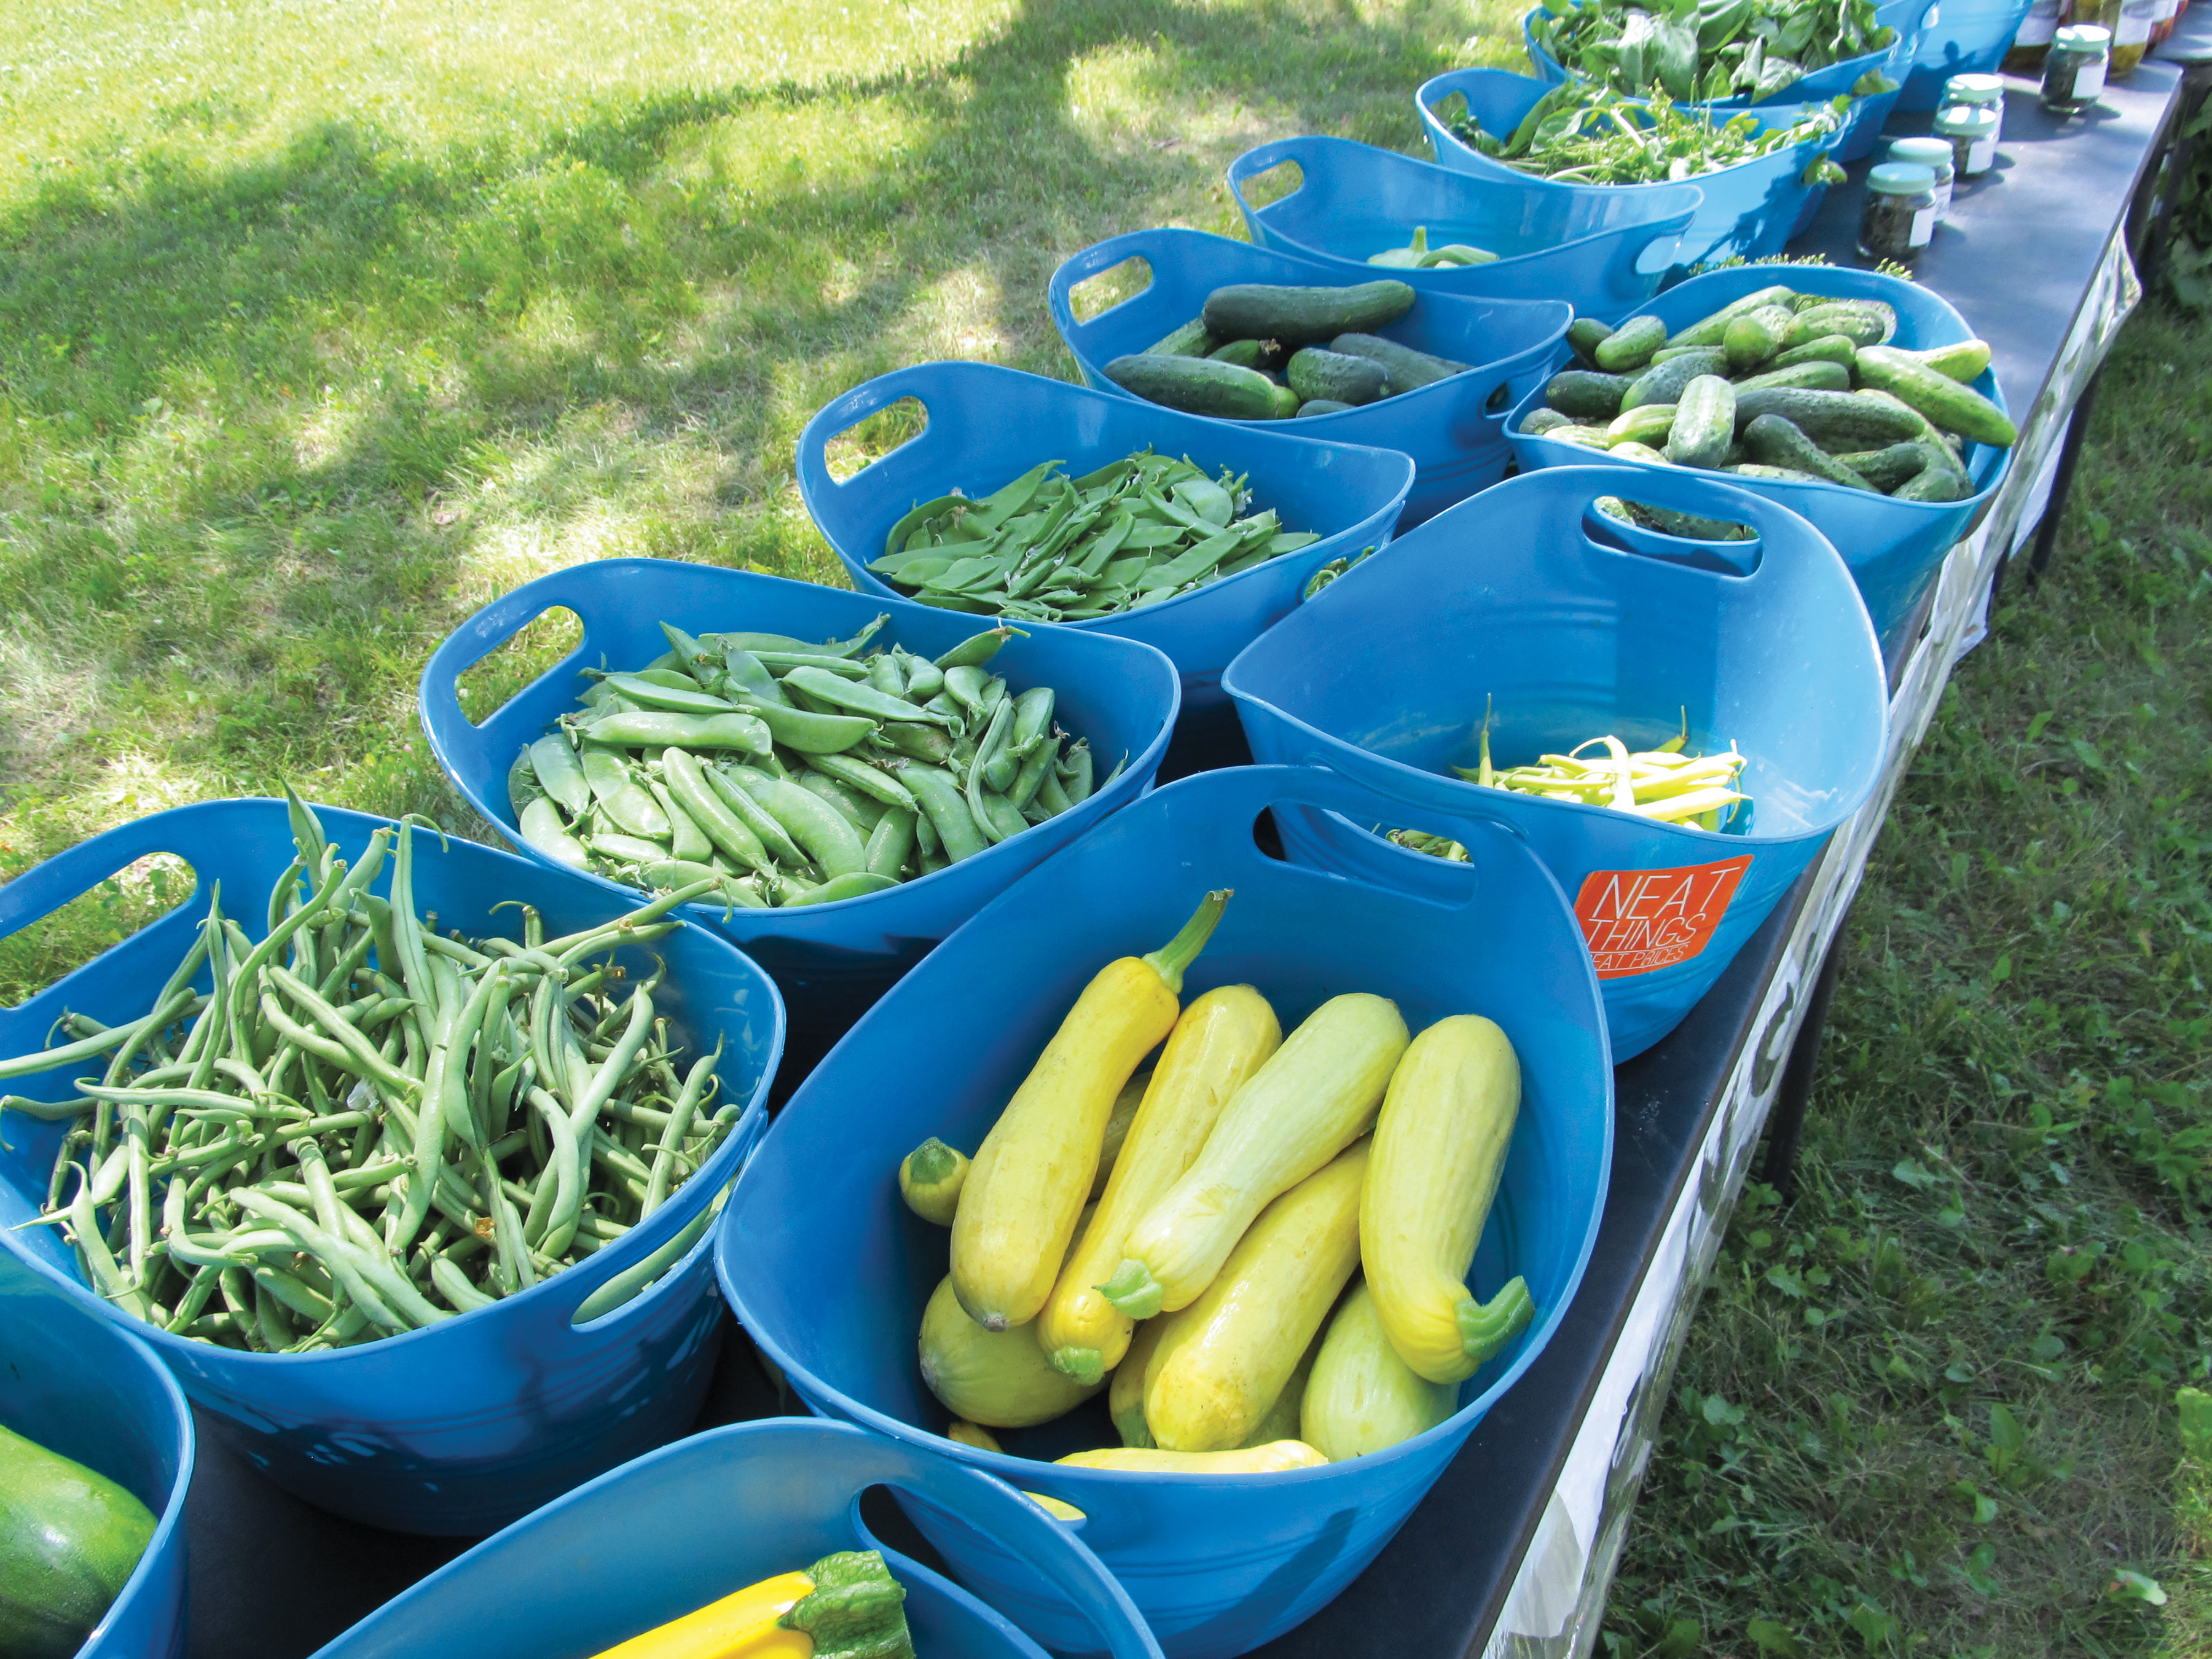 Variety of fresh vegetables in blue plastic totes on a table at a farmers market.